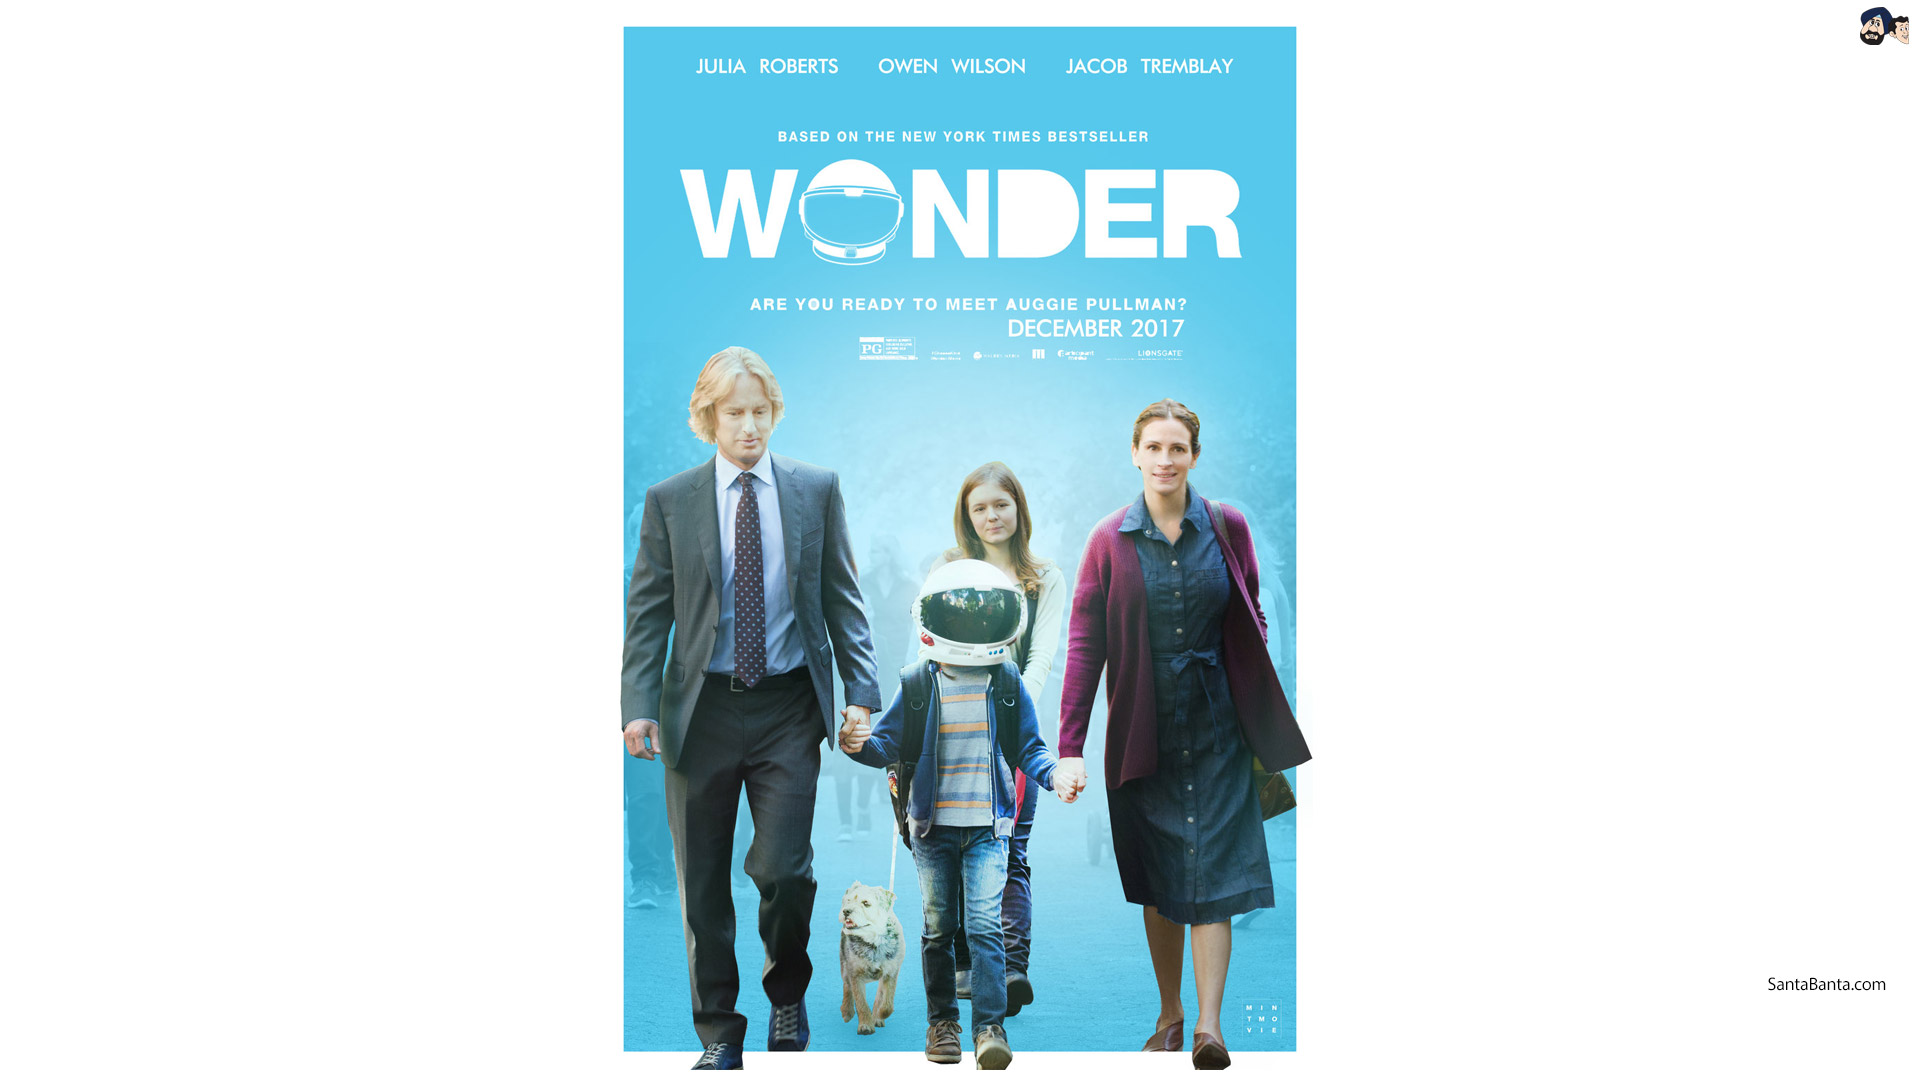 Wonder Book Cover Image Wallpapers